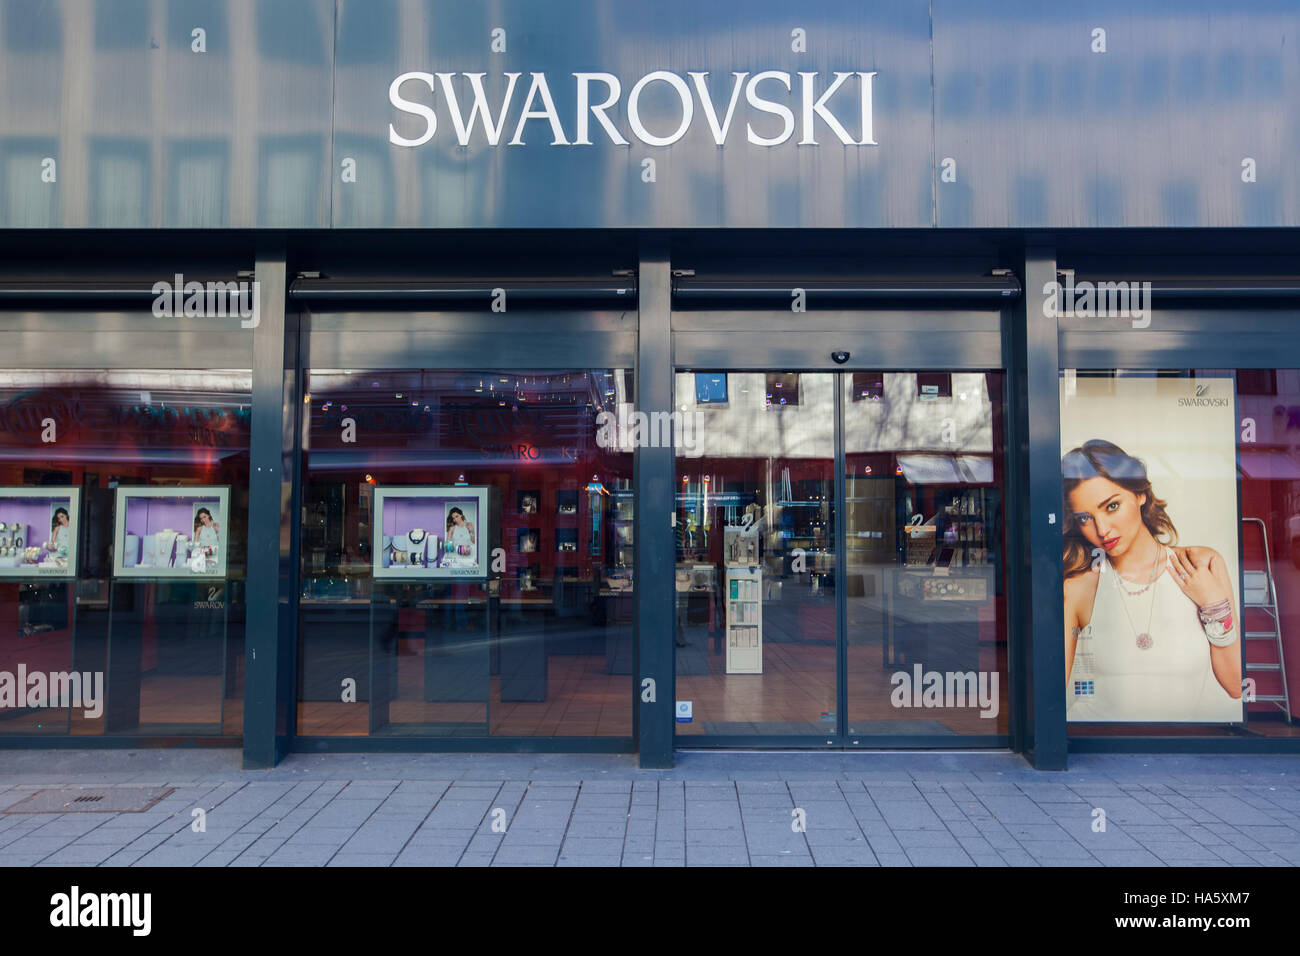 Swarovski Shop High Resolution Stock Photography and Images - Alamy